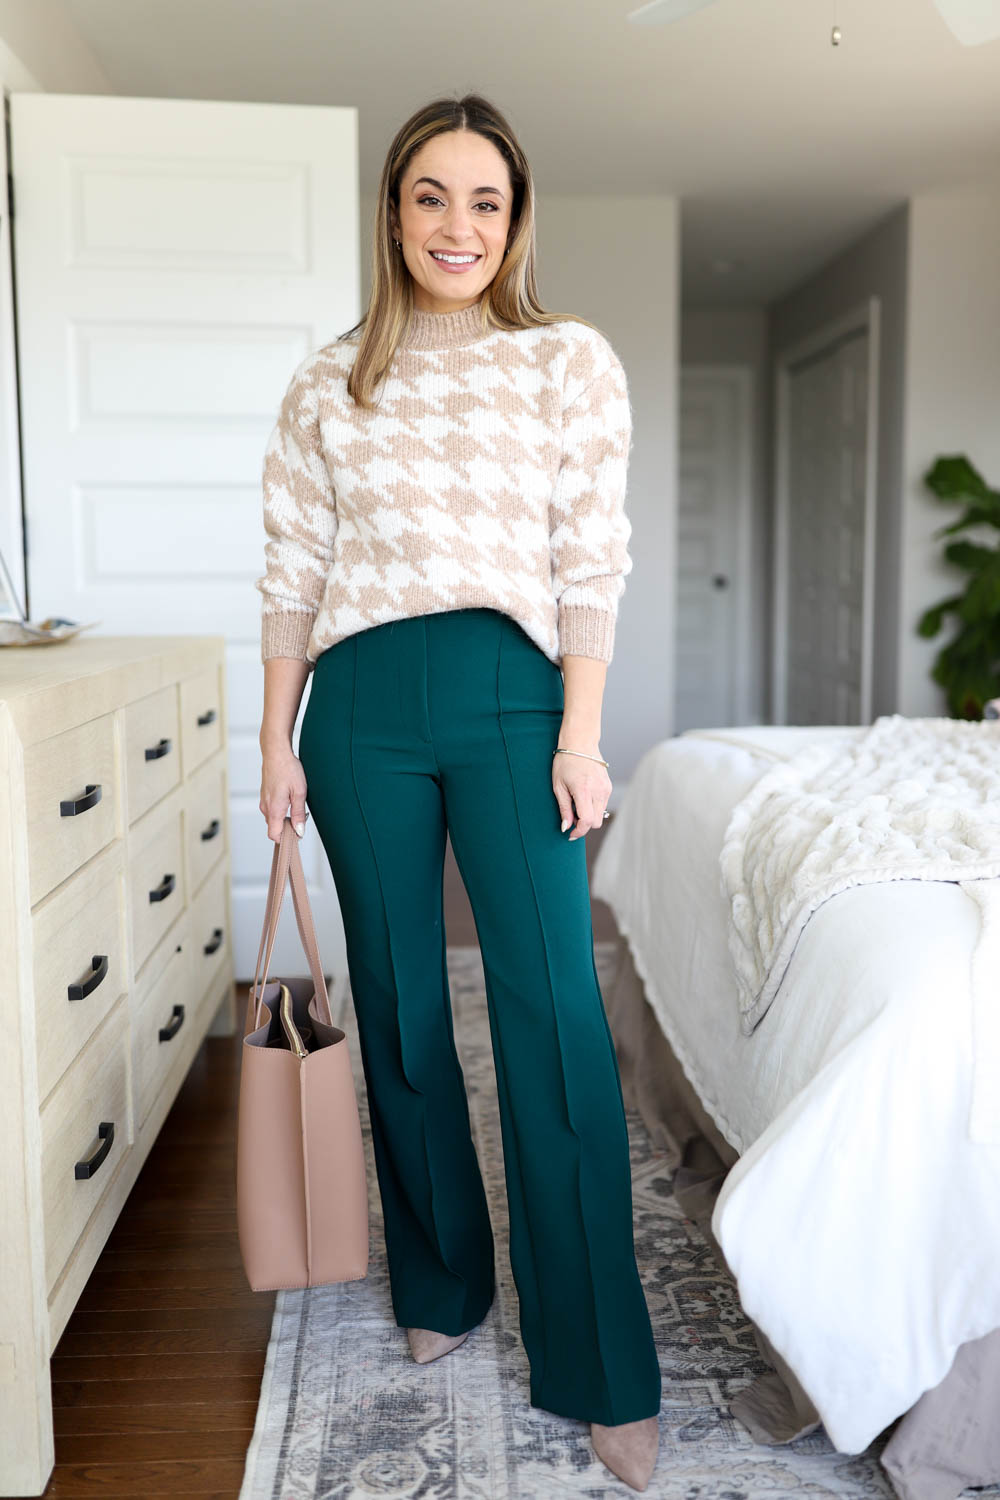 Warm Winter Outfits for Work - Pumps & Push Ups